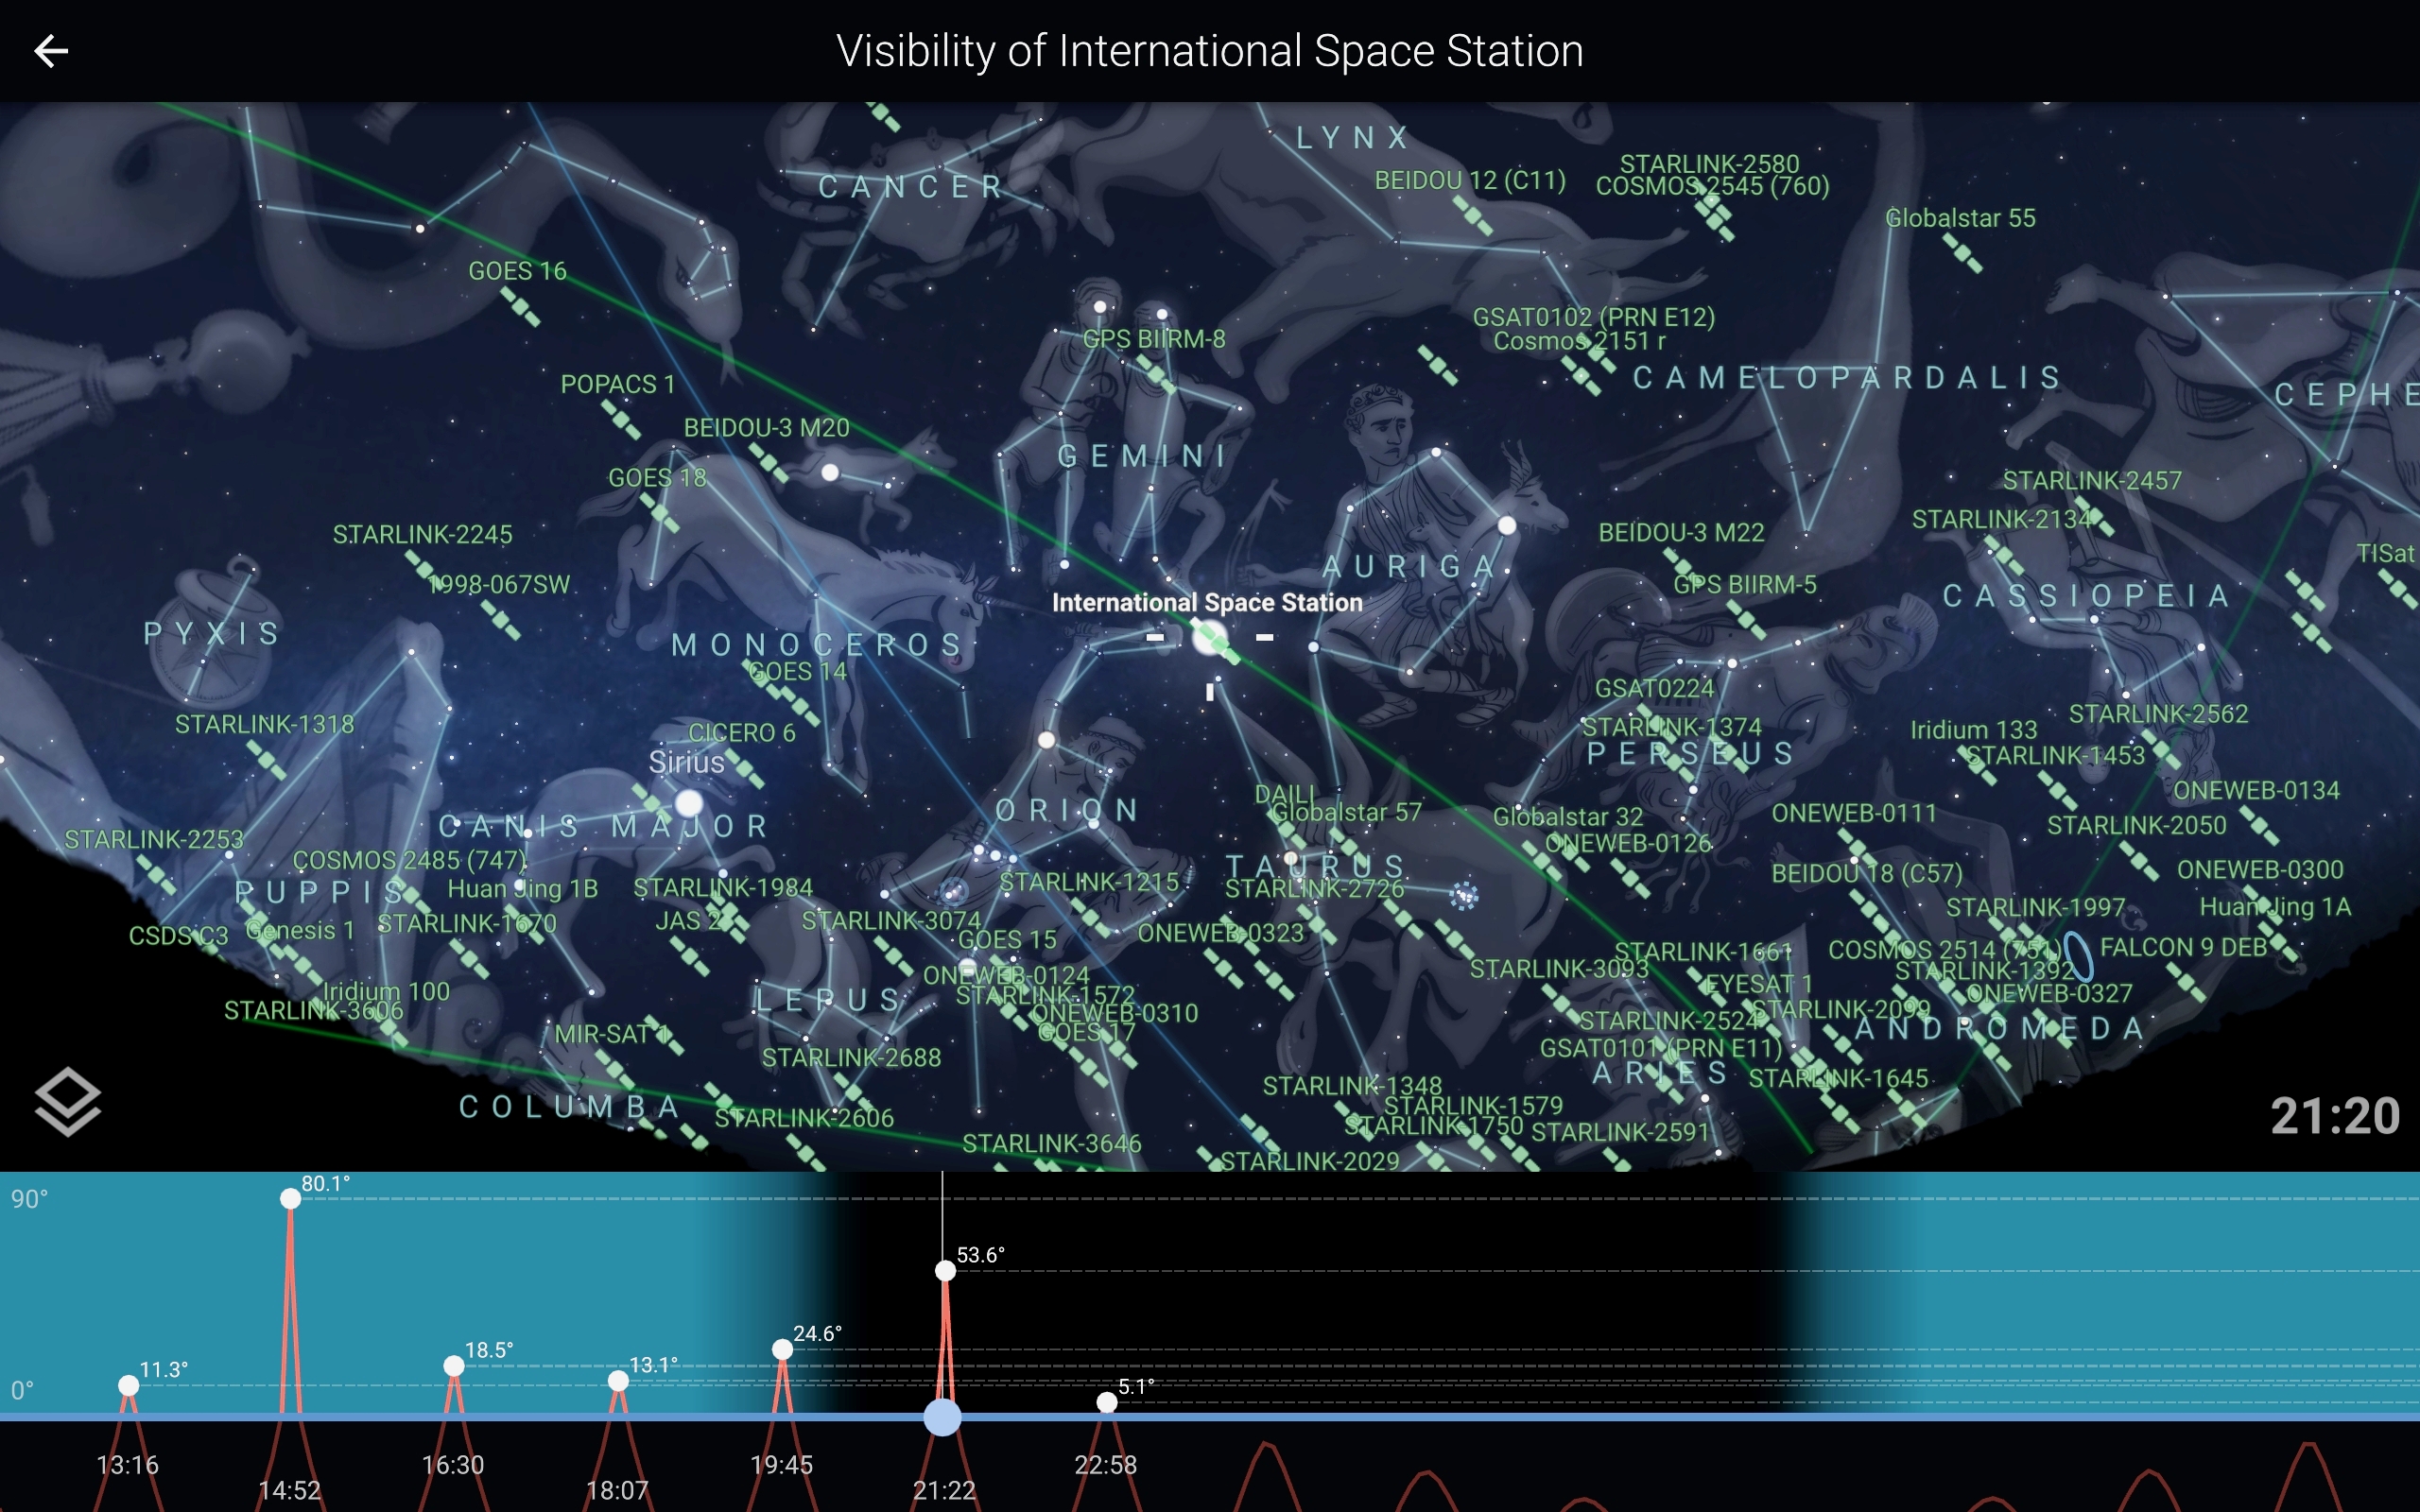 In the mobile version of the popular Stellarium desktop program, the predicted passes for the selected satellite are presented in a graph of sky elevation versus time for the current 24-hour period. Tapping any peak will show the sky for that pass. The local time and the maximum height of the pass are labeled.